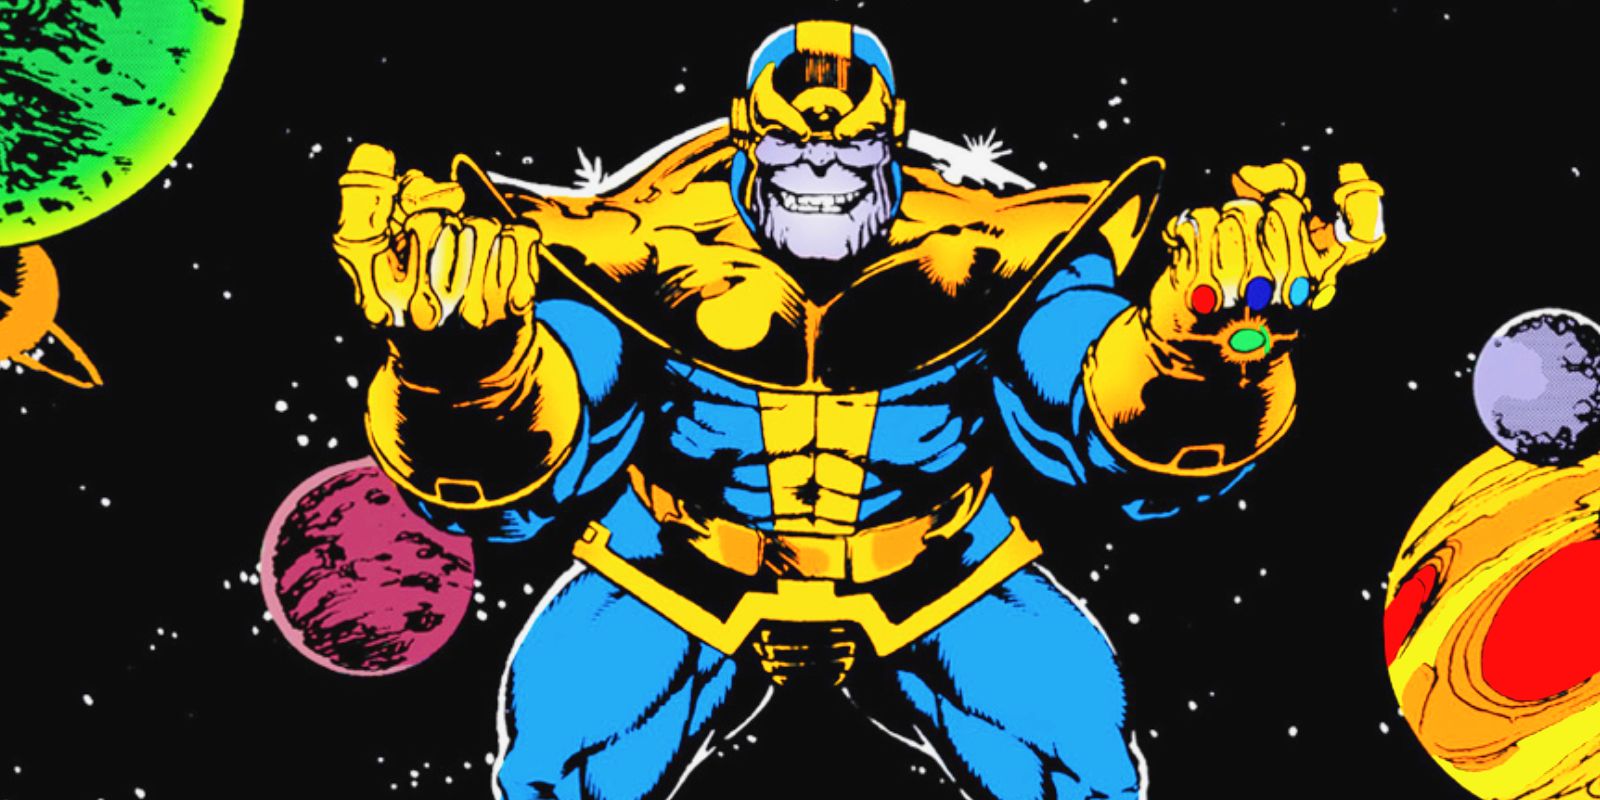 Thanos with the Infinity Gauntlet in George Pe rez art